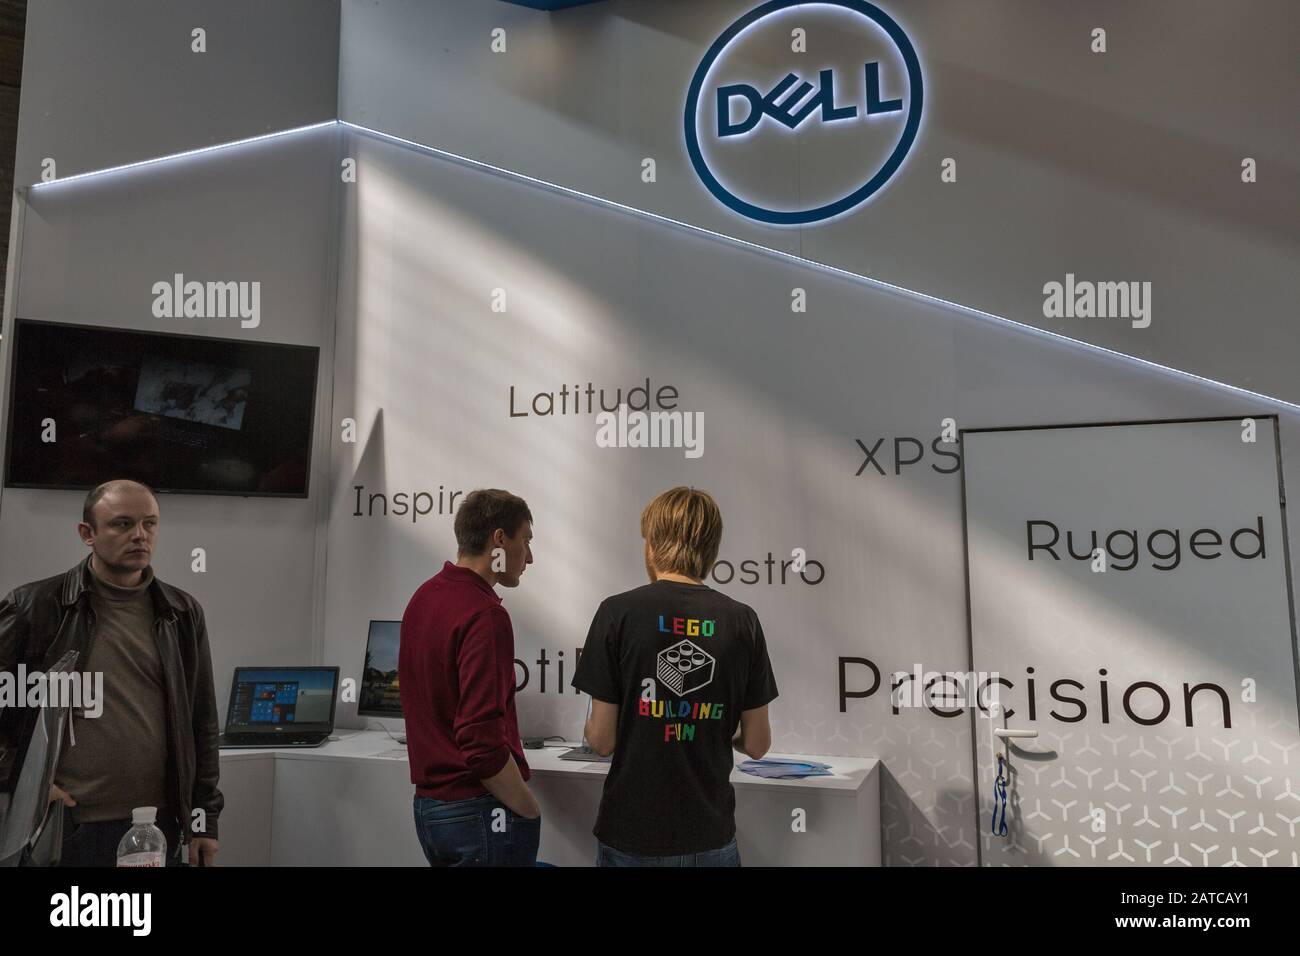 KYIV, UKRAINE - APRIL 06, 2019: People visit Dell, American multinational computer technology company that develops, sells, repairs, and supports comp Stock Photo